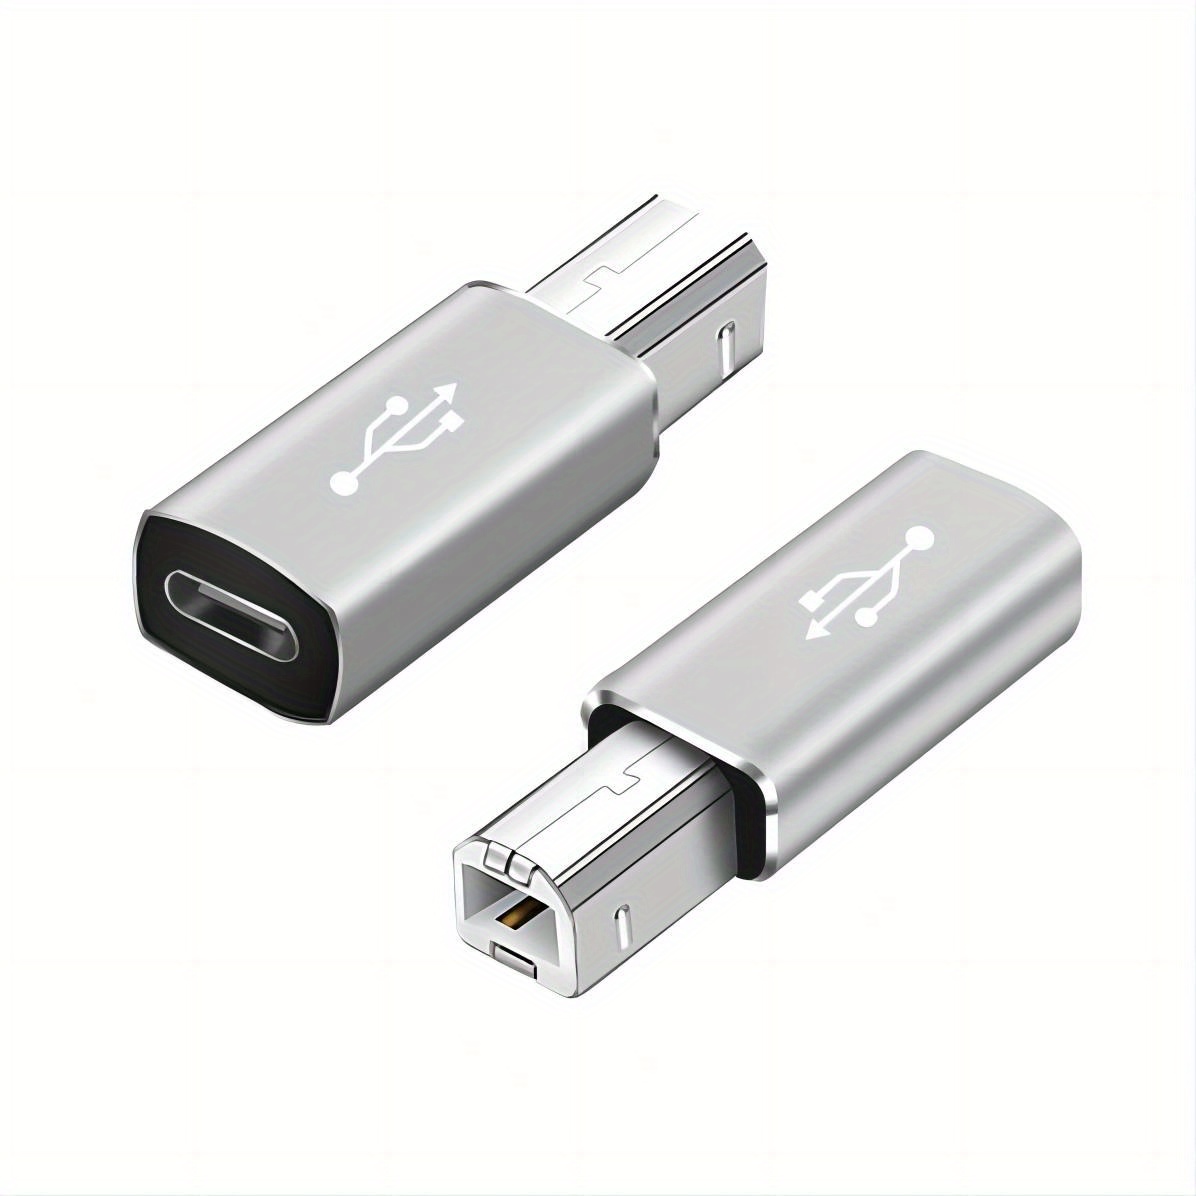 Converting devices to USB Type-C 